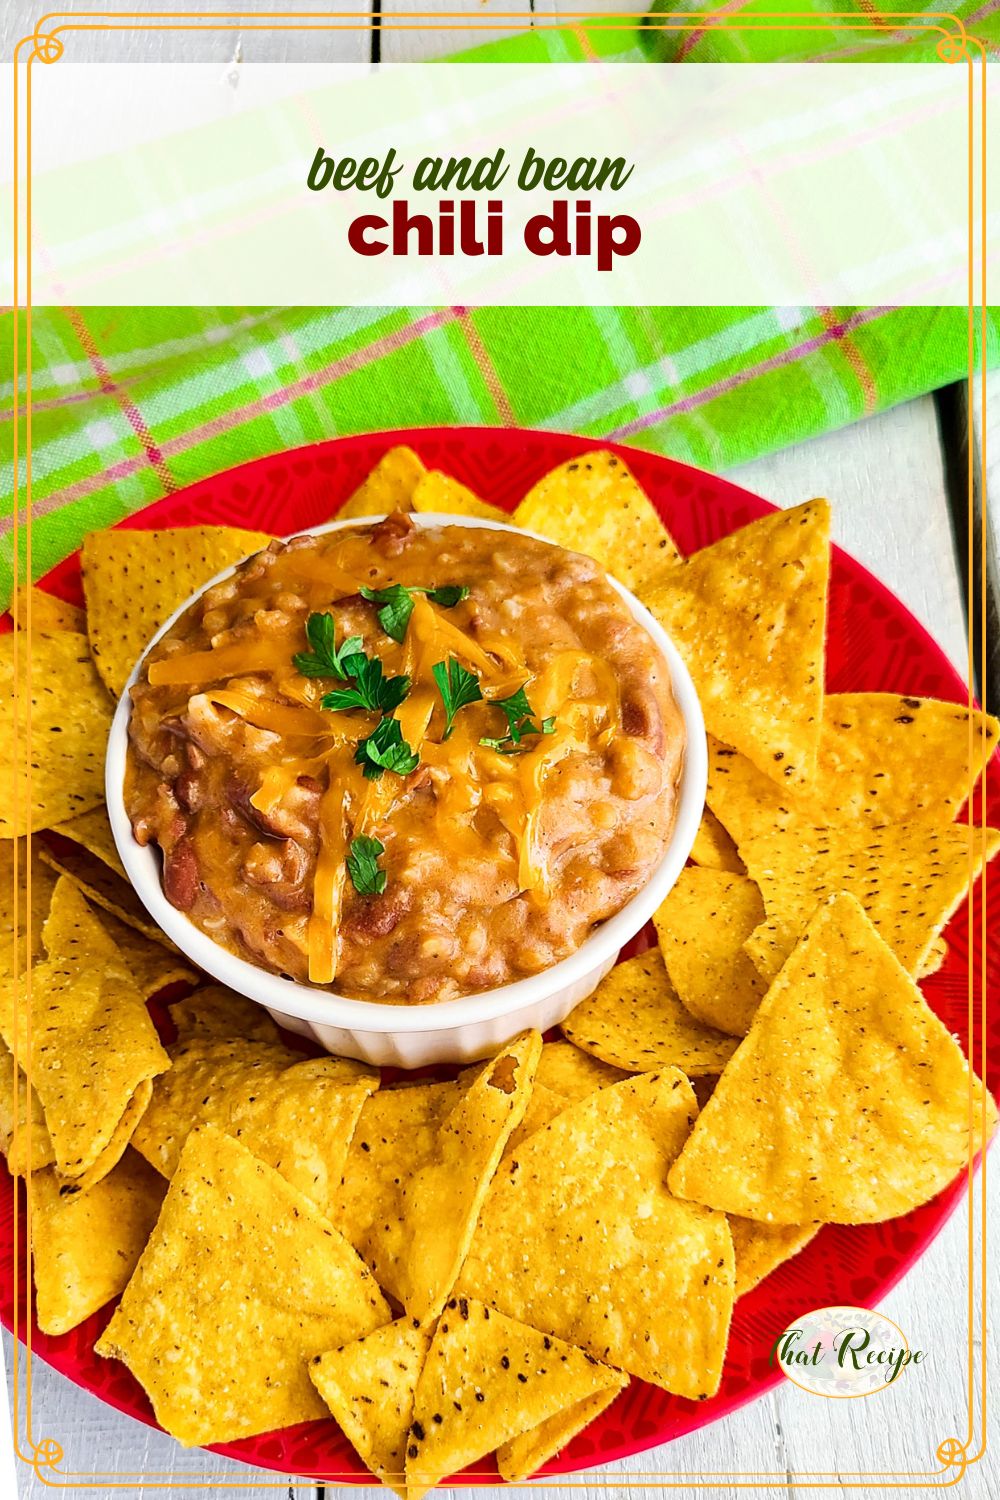 chili dip on a plate with chips and text overlay "beef and bean chili dip"